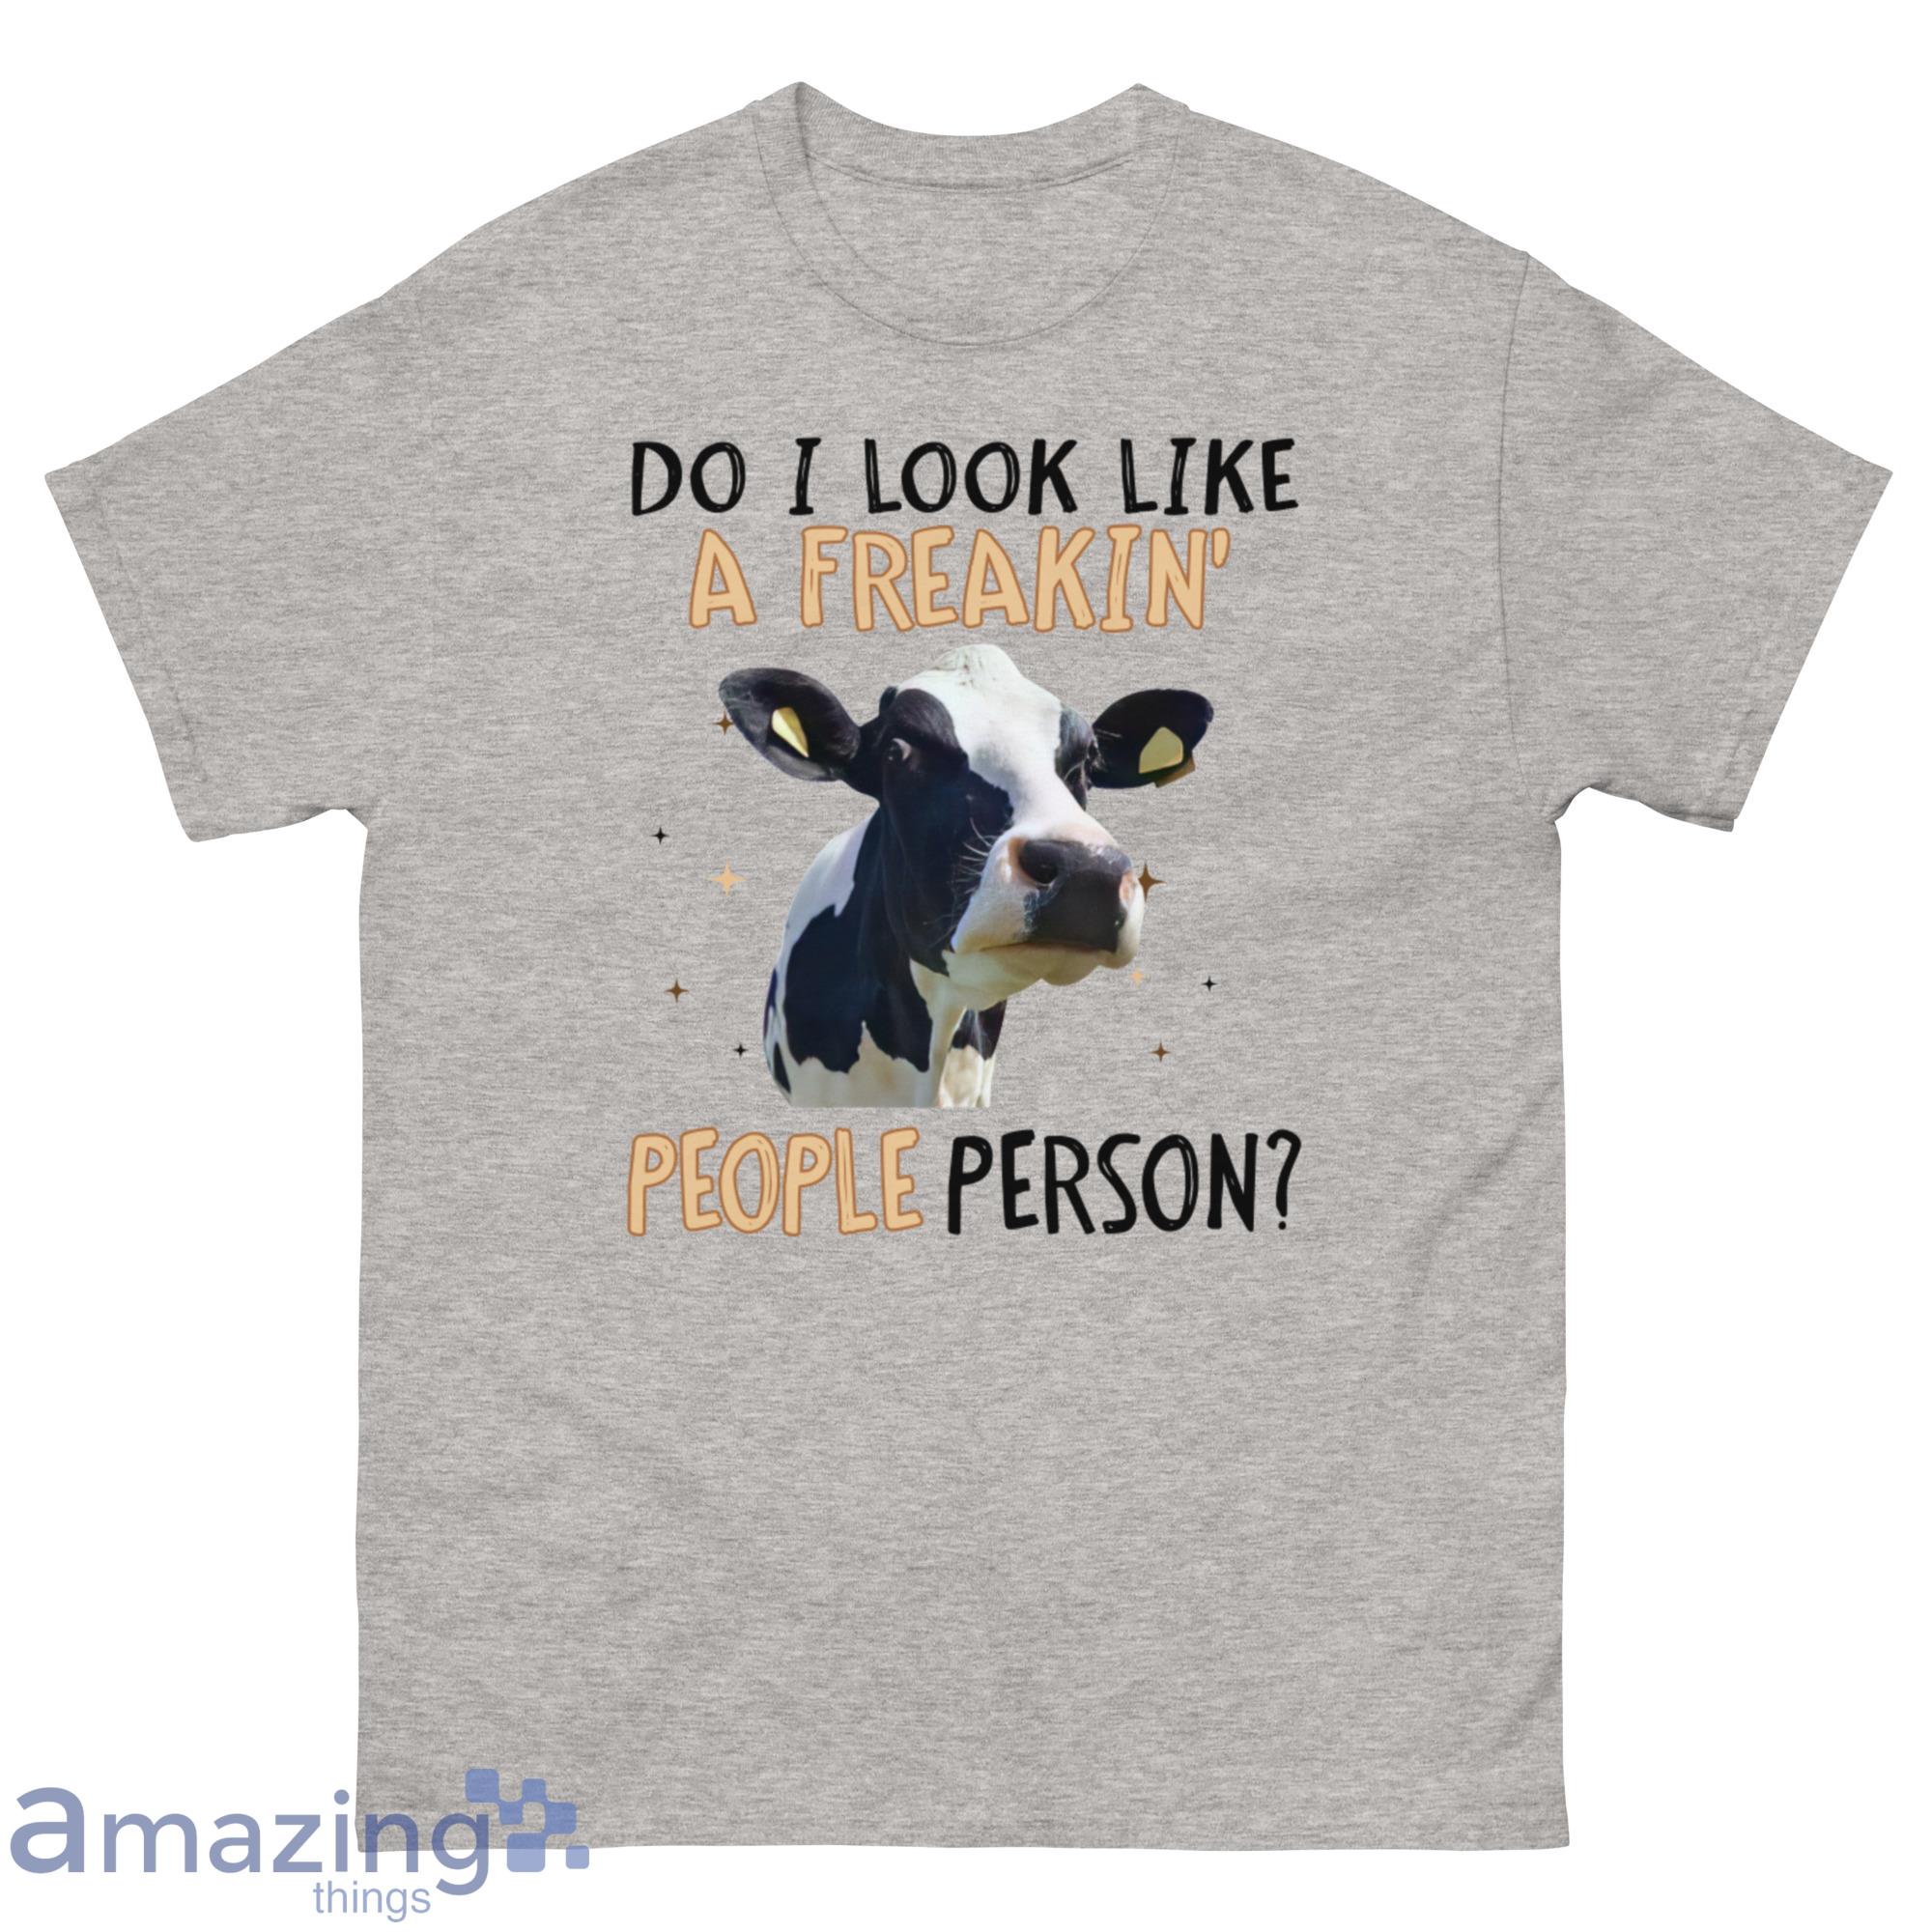 Do I Look Like A Freakin People Person The Cow Shirt - G500 Men’s Classic T-Shirt